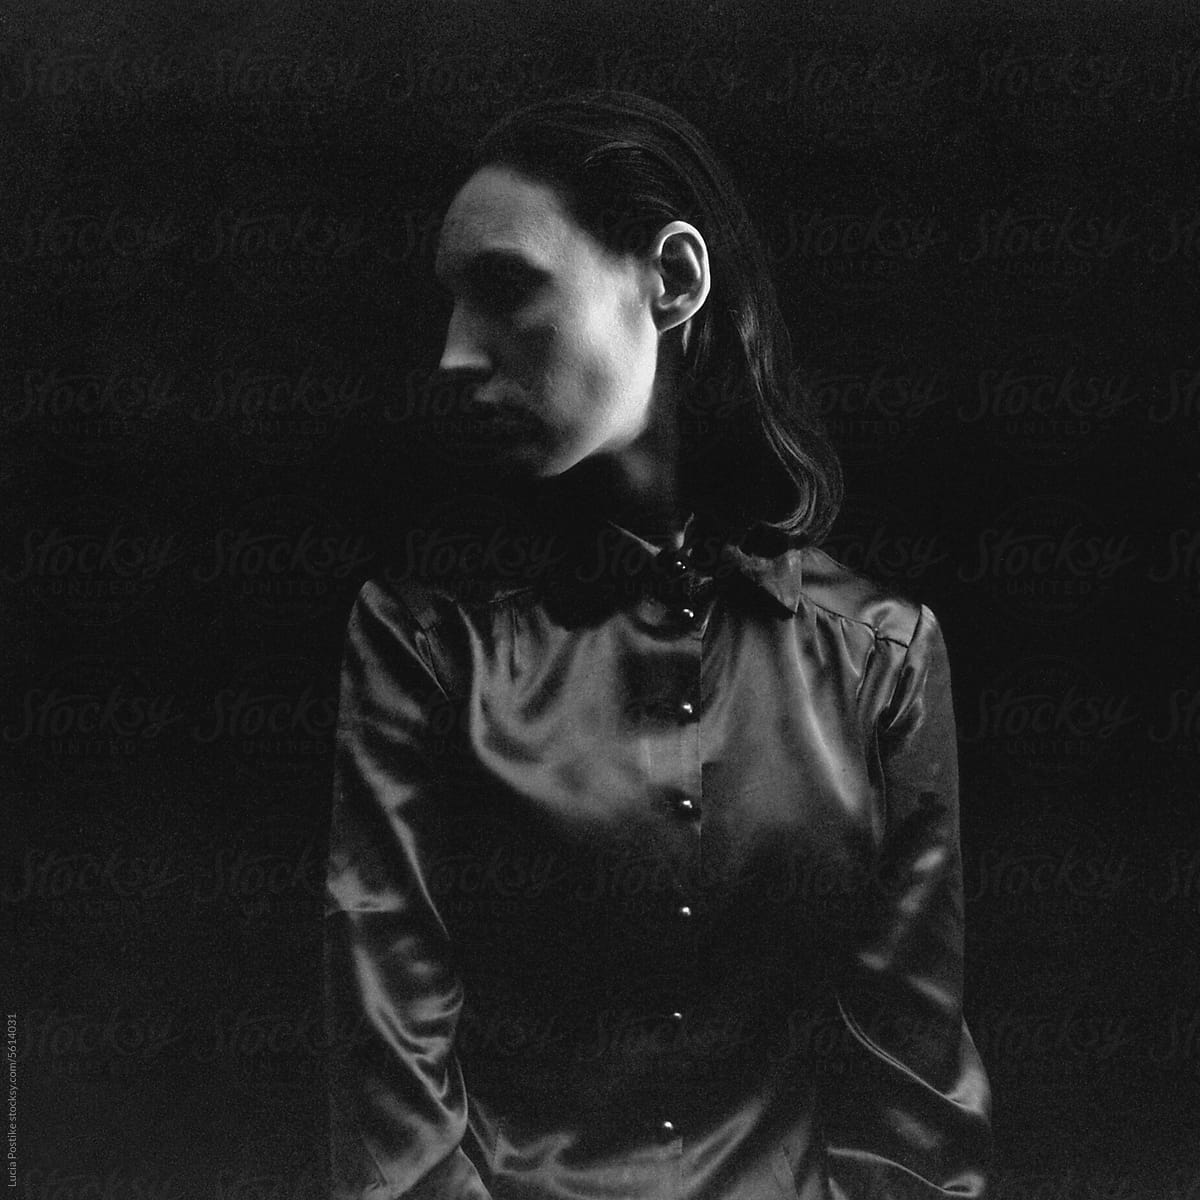 Analog portrait: woman in a blouse